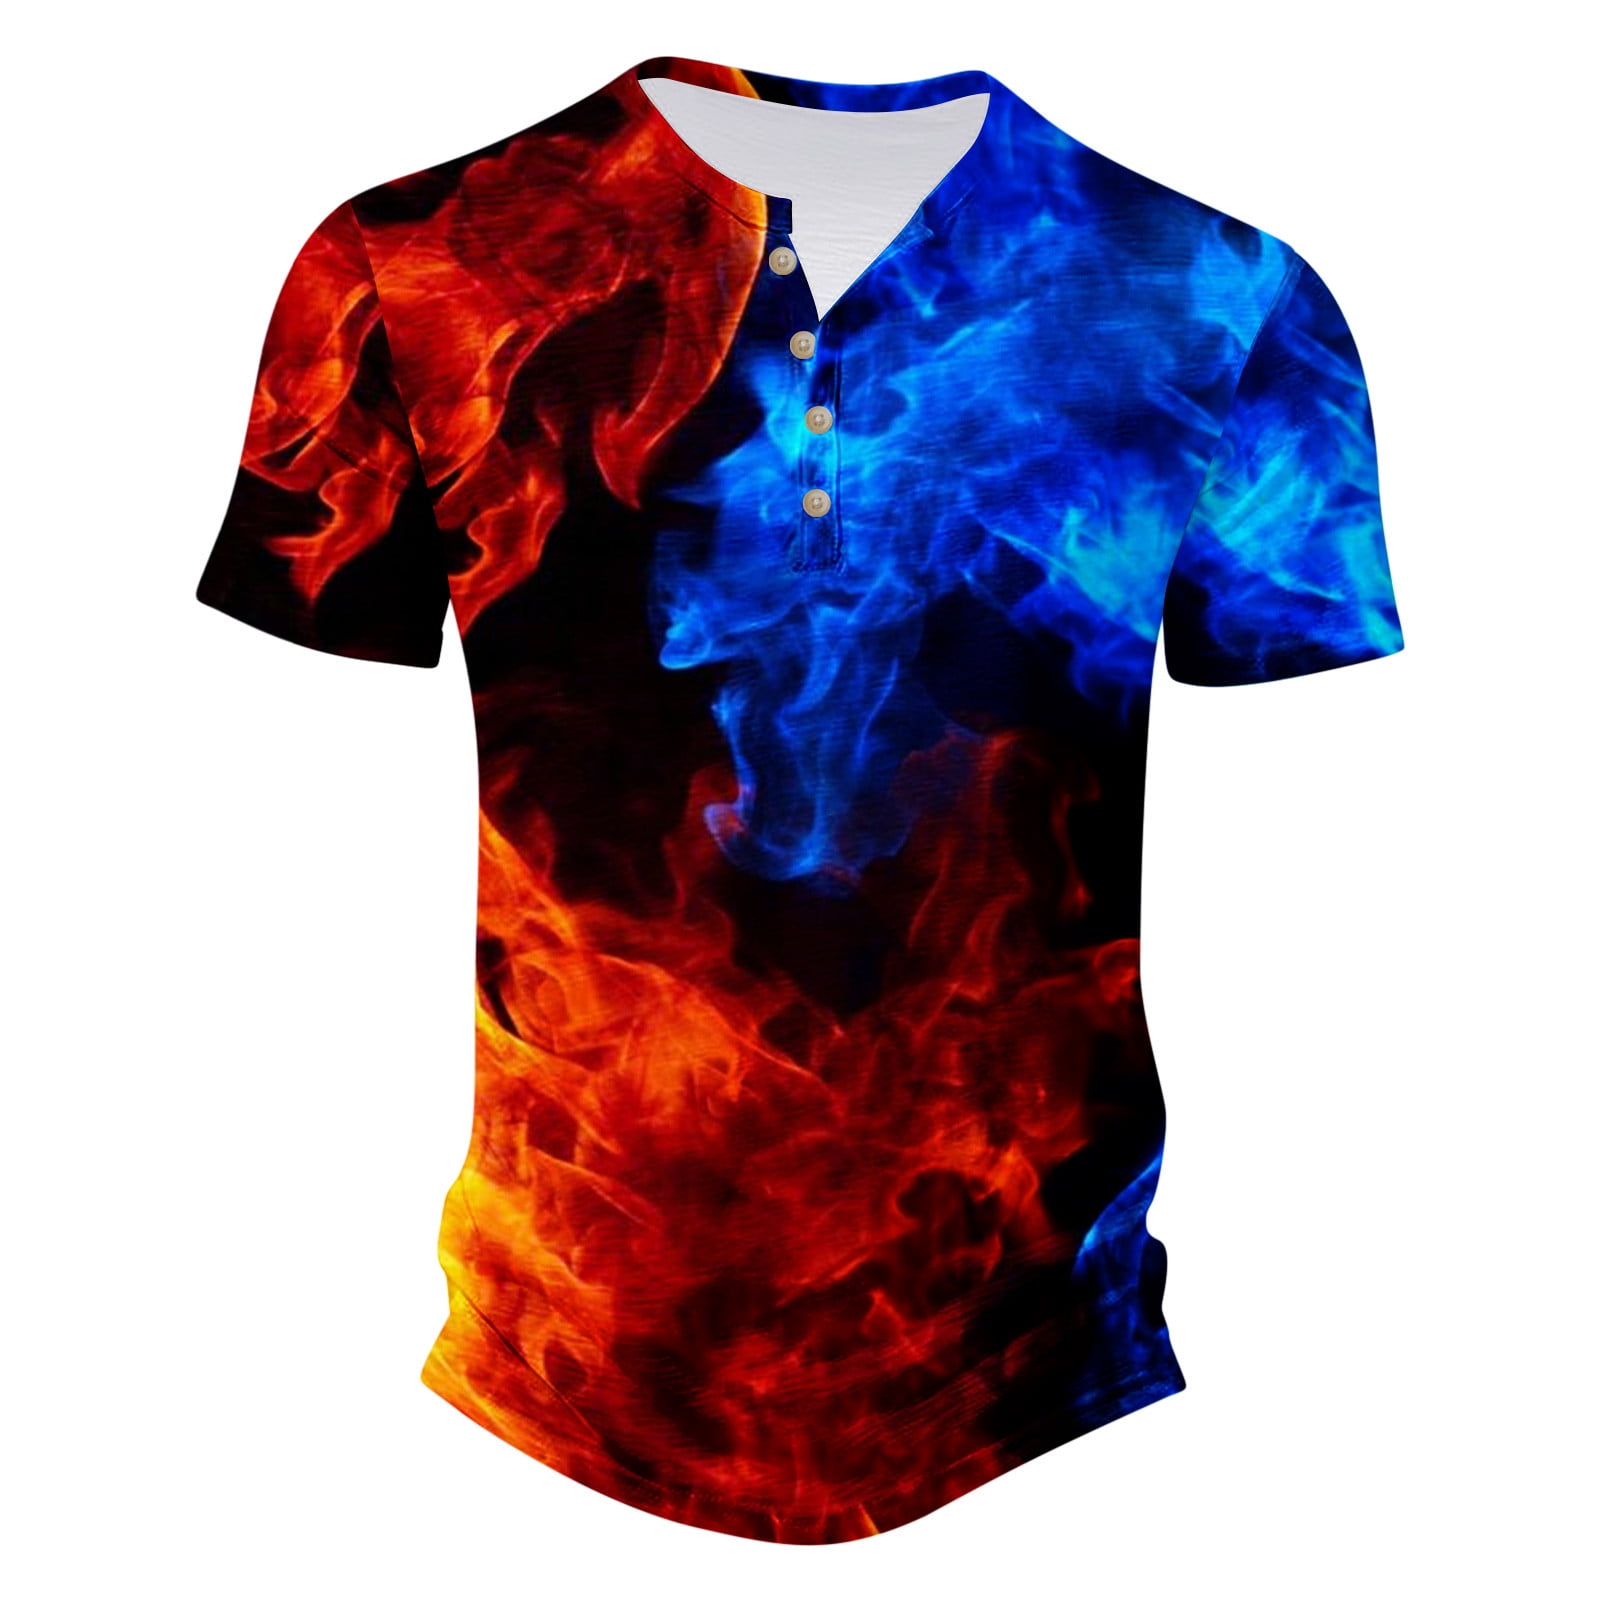 Muscularfit Short Sleeve Mens Tops Clearance Black Graphic V-Neck Flame ...